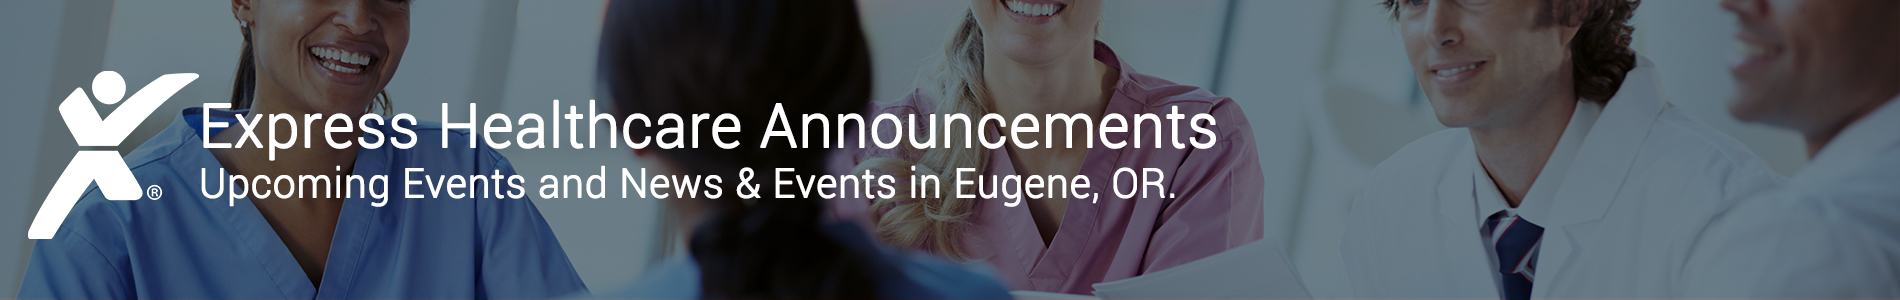 RN Careers in Eugene, OR - Healthcare Announcements